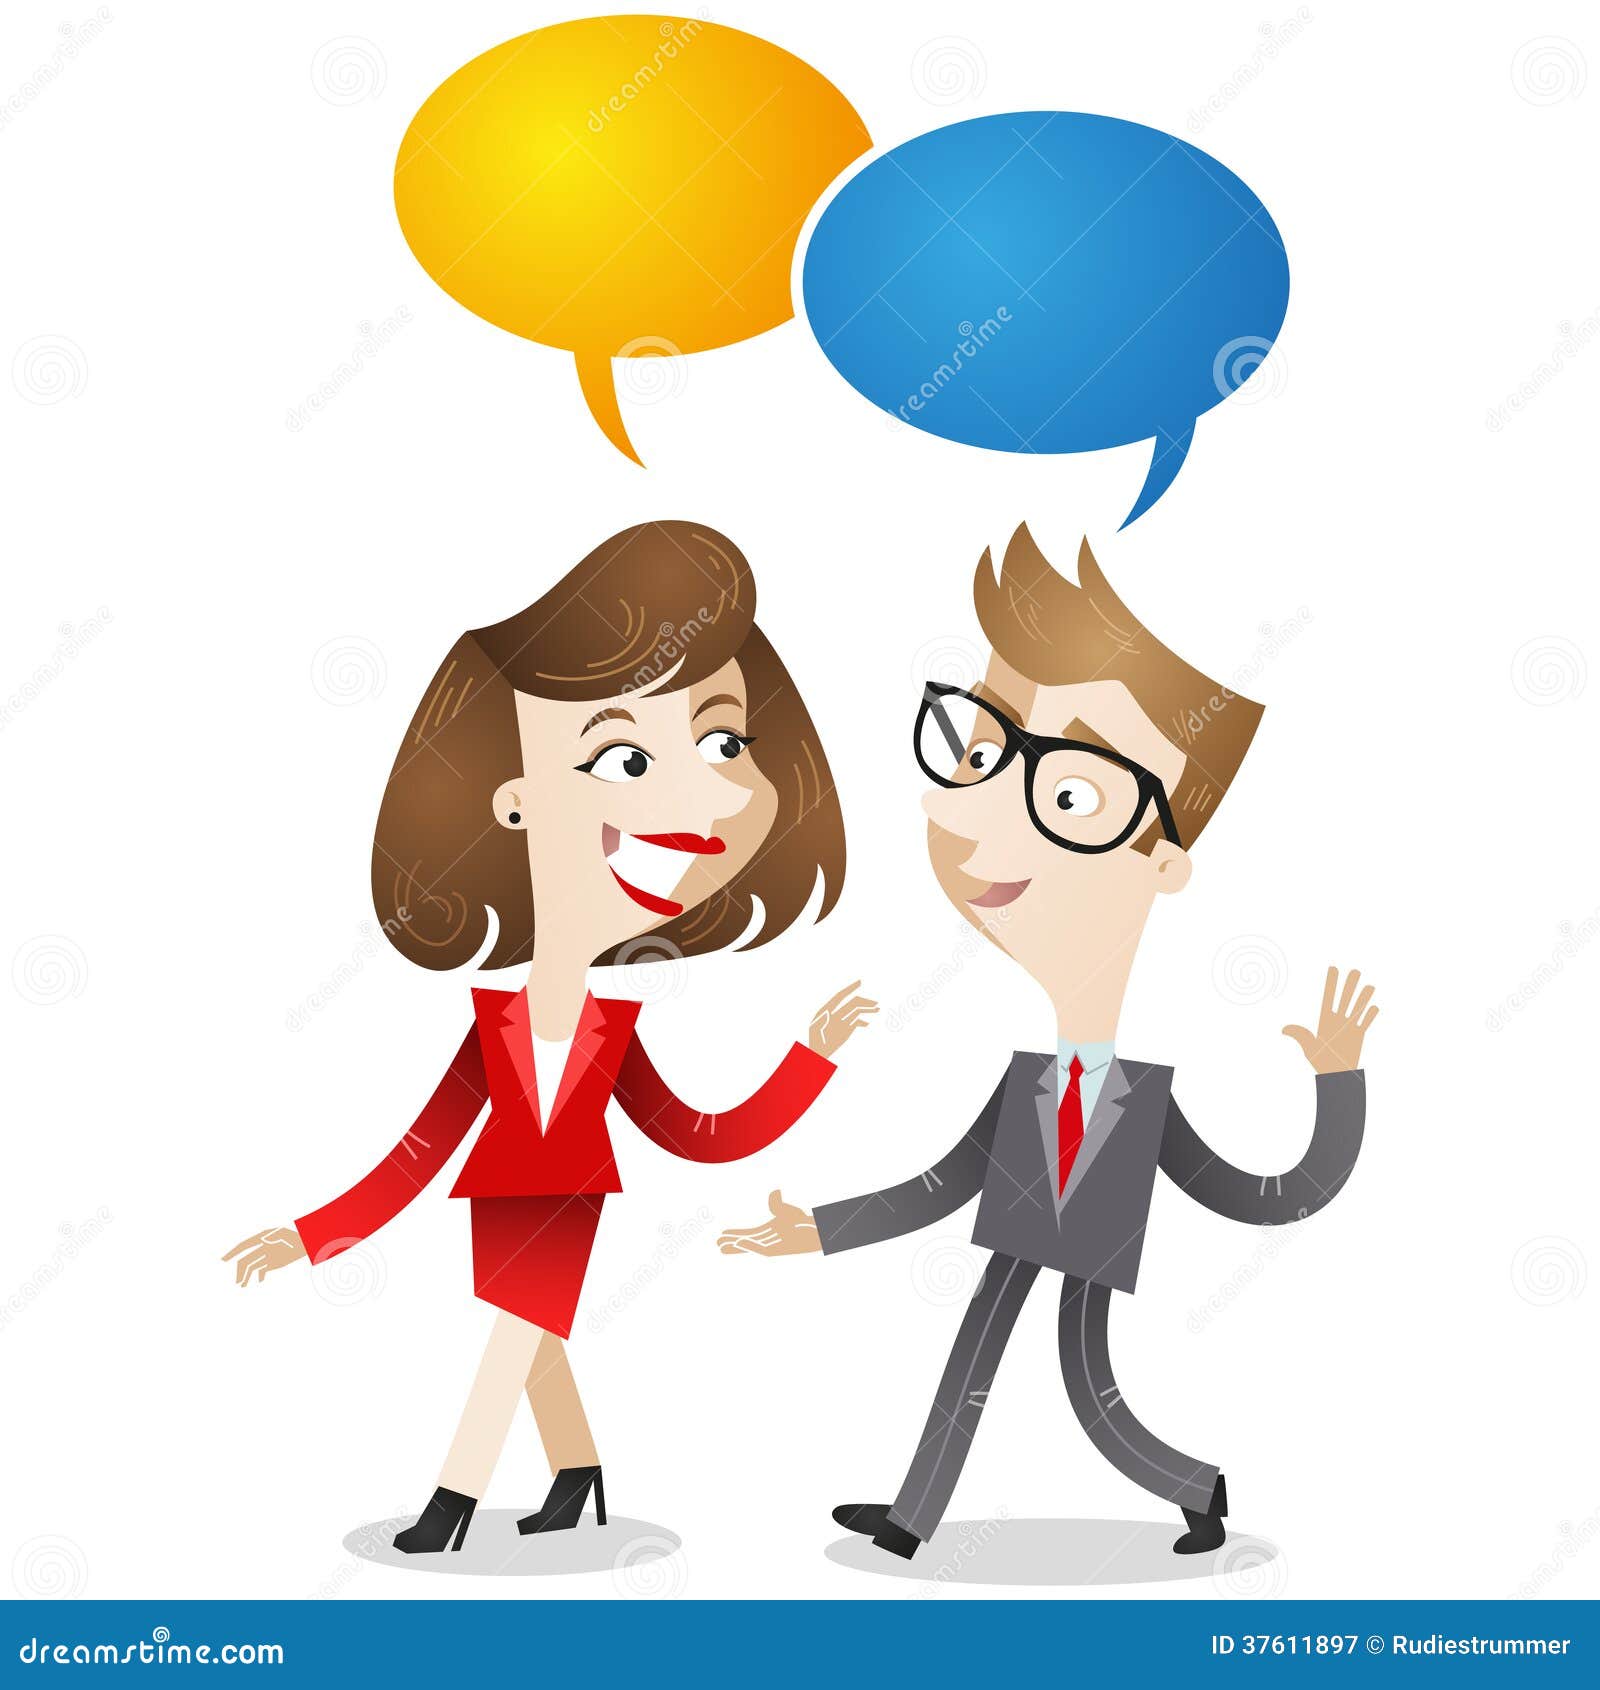 clipart man and woman talking - photo #8